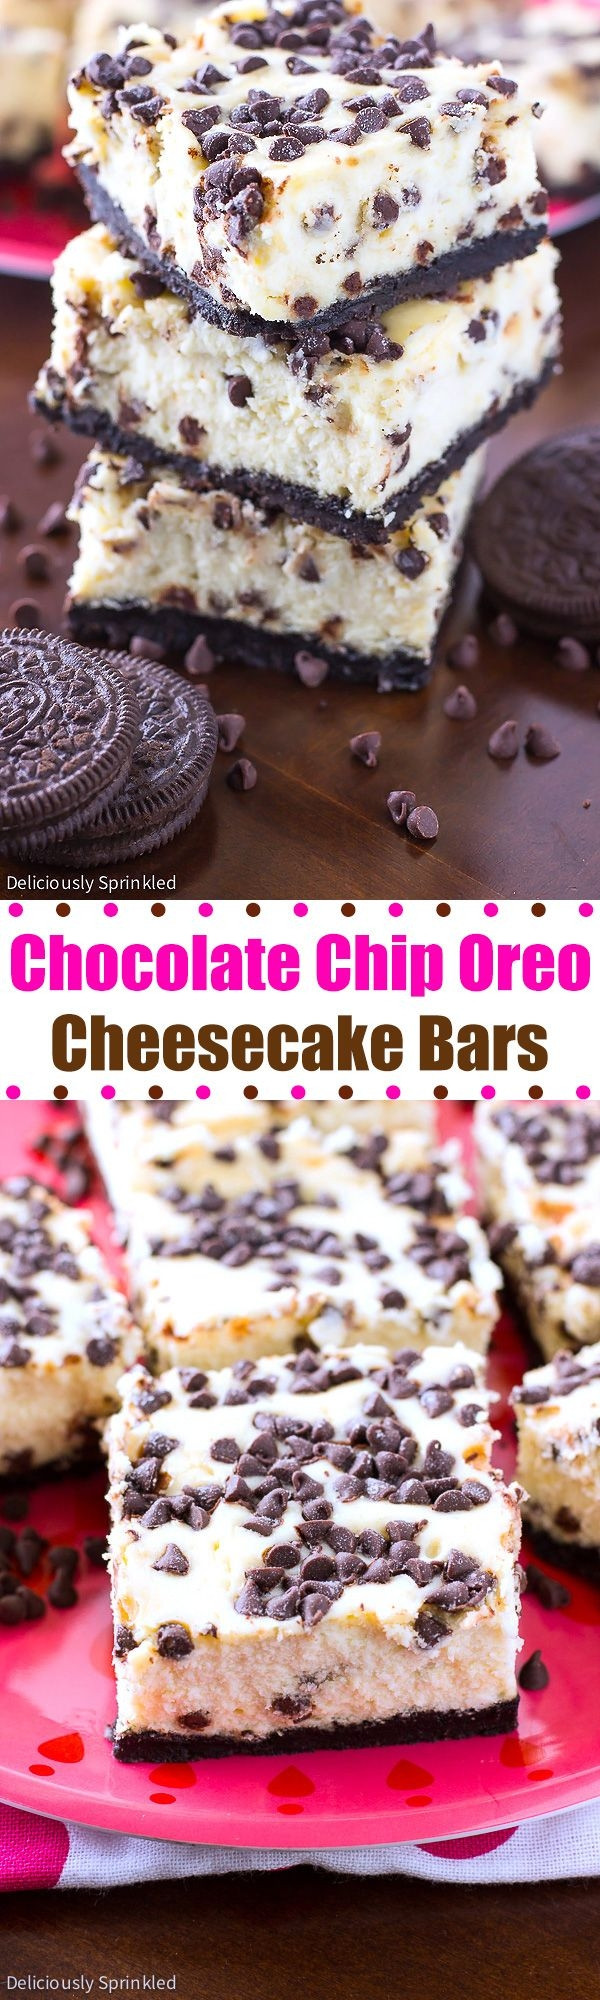 Easy Desserts With Chocolate Chips
 Chocolate Chip Oreo Cheesecake Bars an easy dessert to